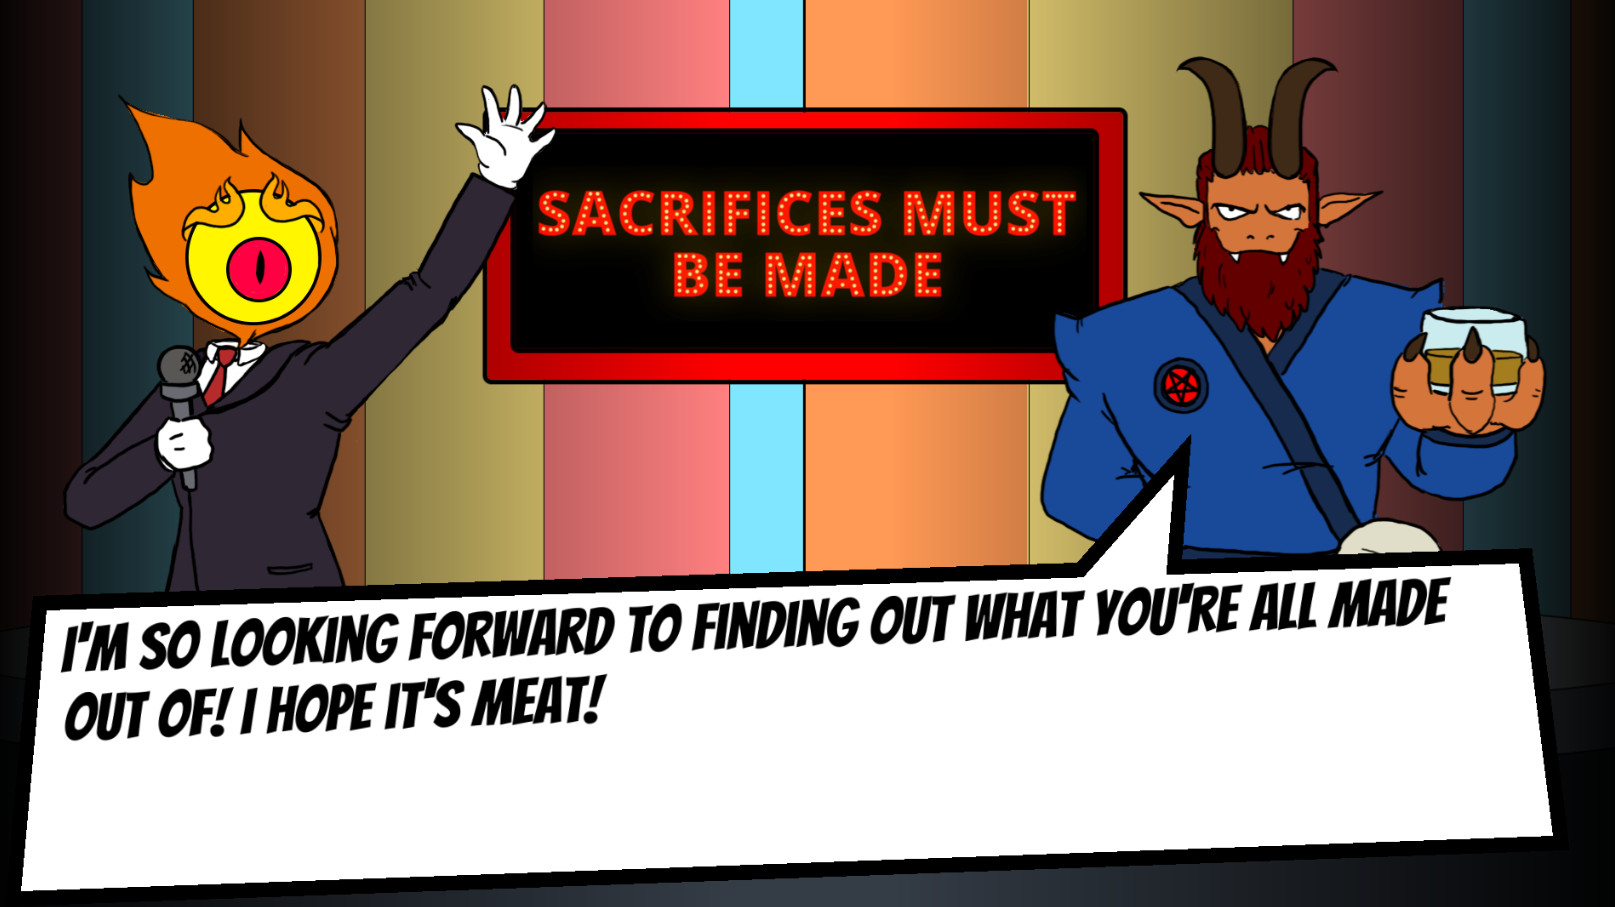 Sacrifices Must Be Made - The original Ludum Dare prototype which